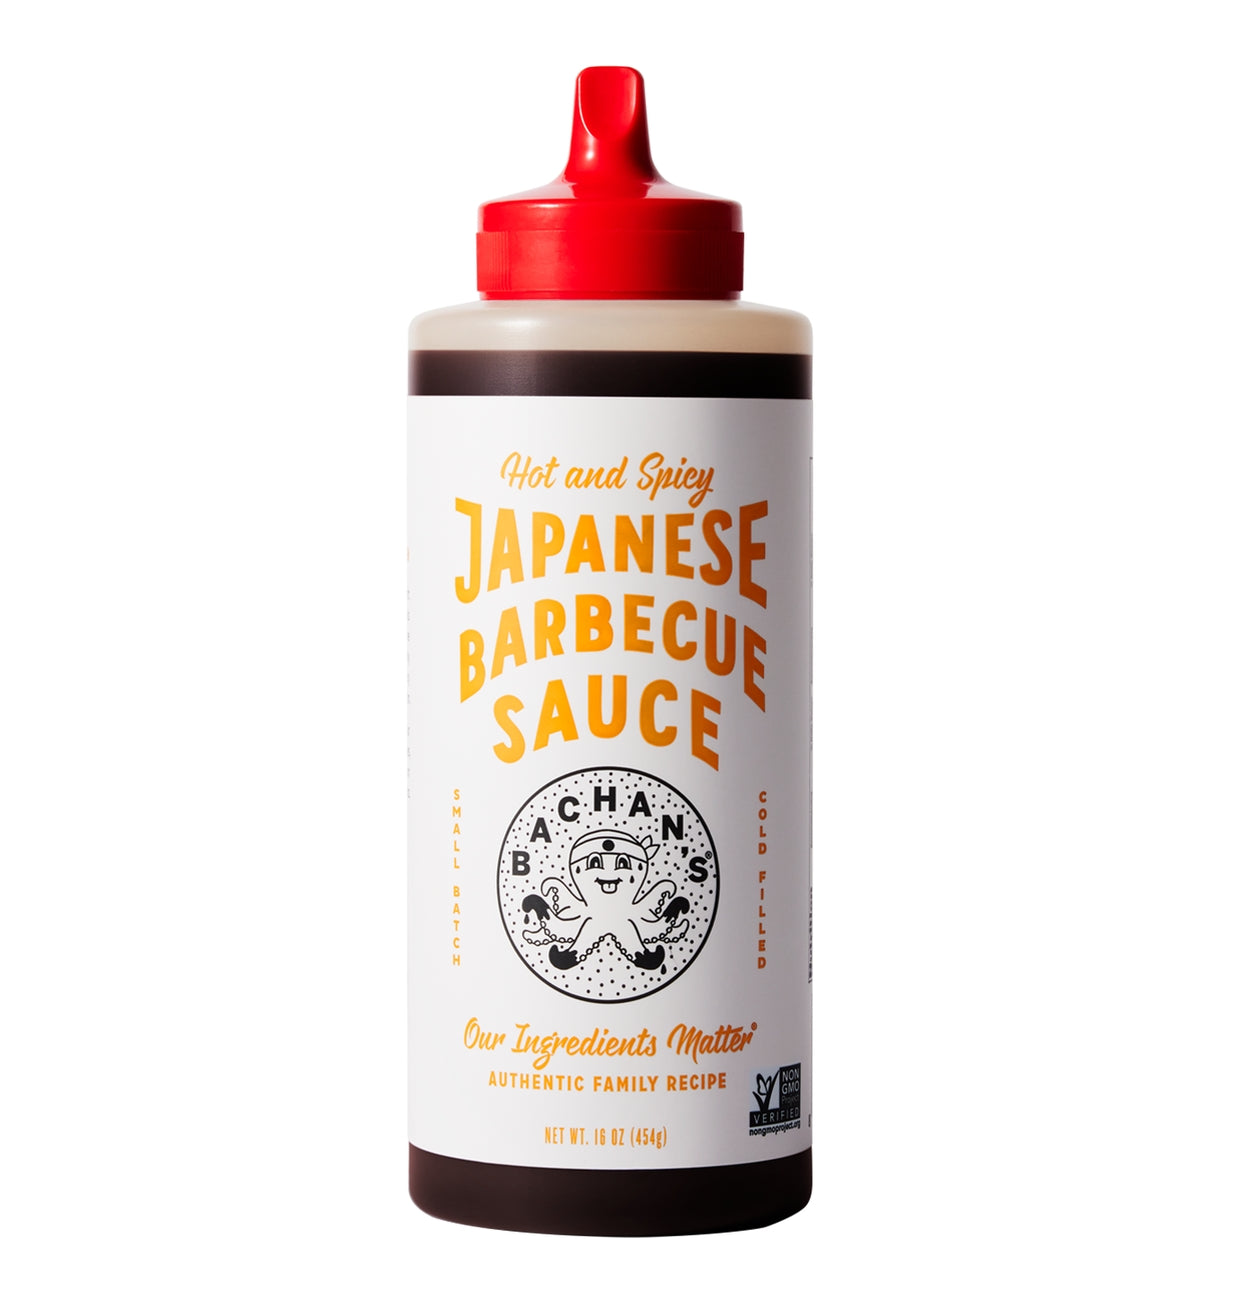 Bachan's Japanese Barbecue Sauces: GF, Spicy, and Yuzu